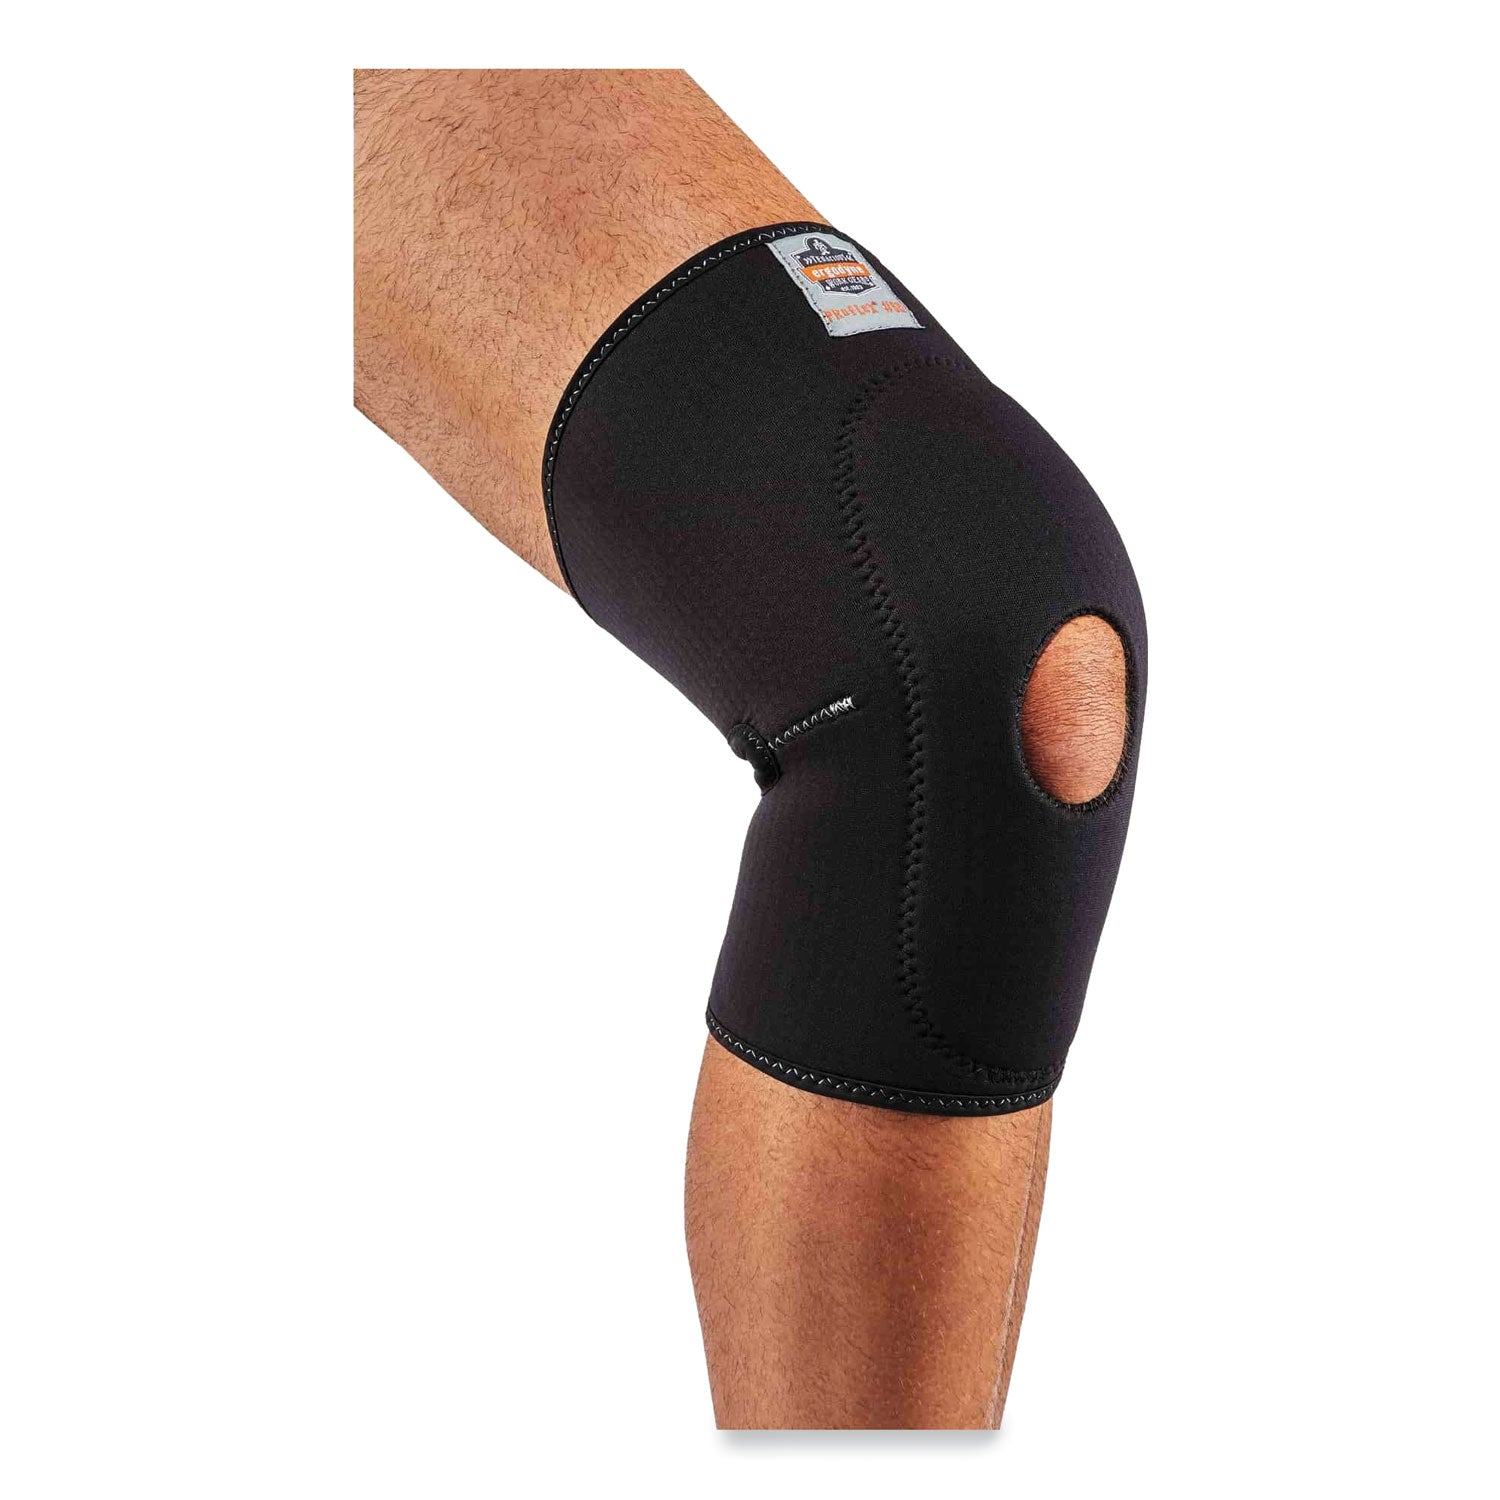 proflex-615-open-patella-anterior-pad-knee-sleeve-2x-large-black-ships-in-1-3-business-days_ego16536 - 4